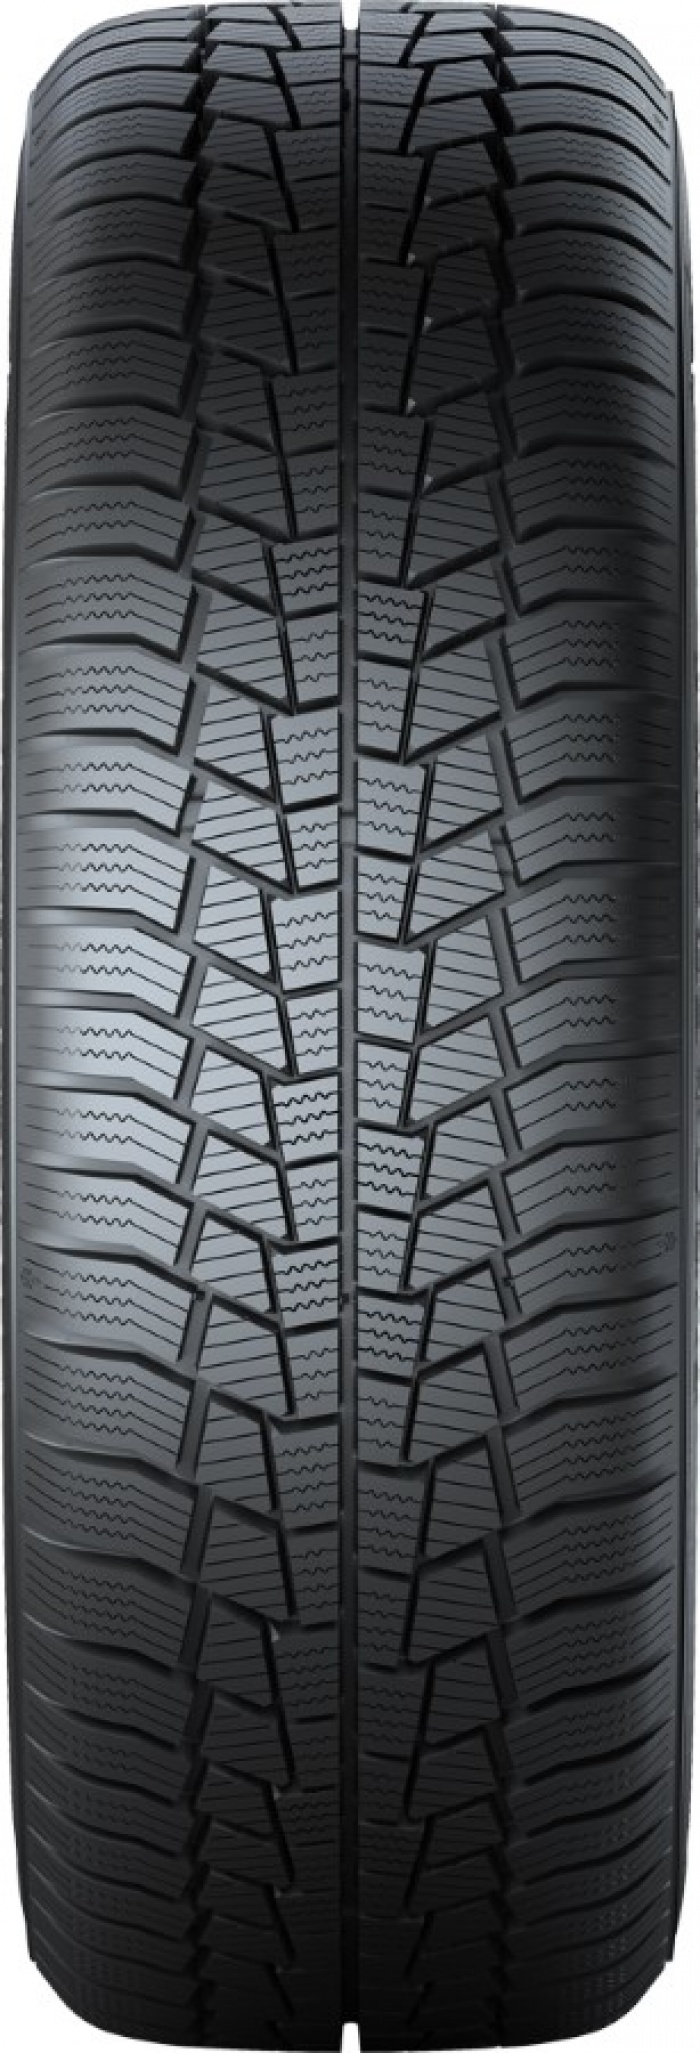 Gislaved Euro Frost 6 185/60 R15 88T  не шип